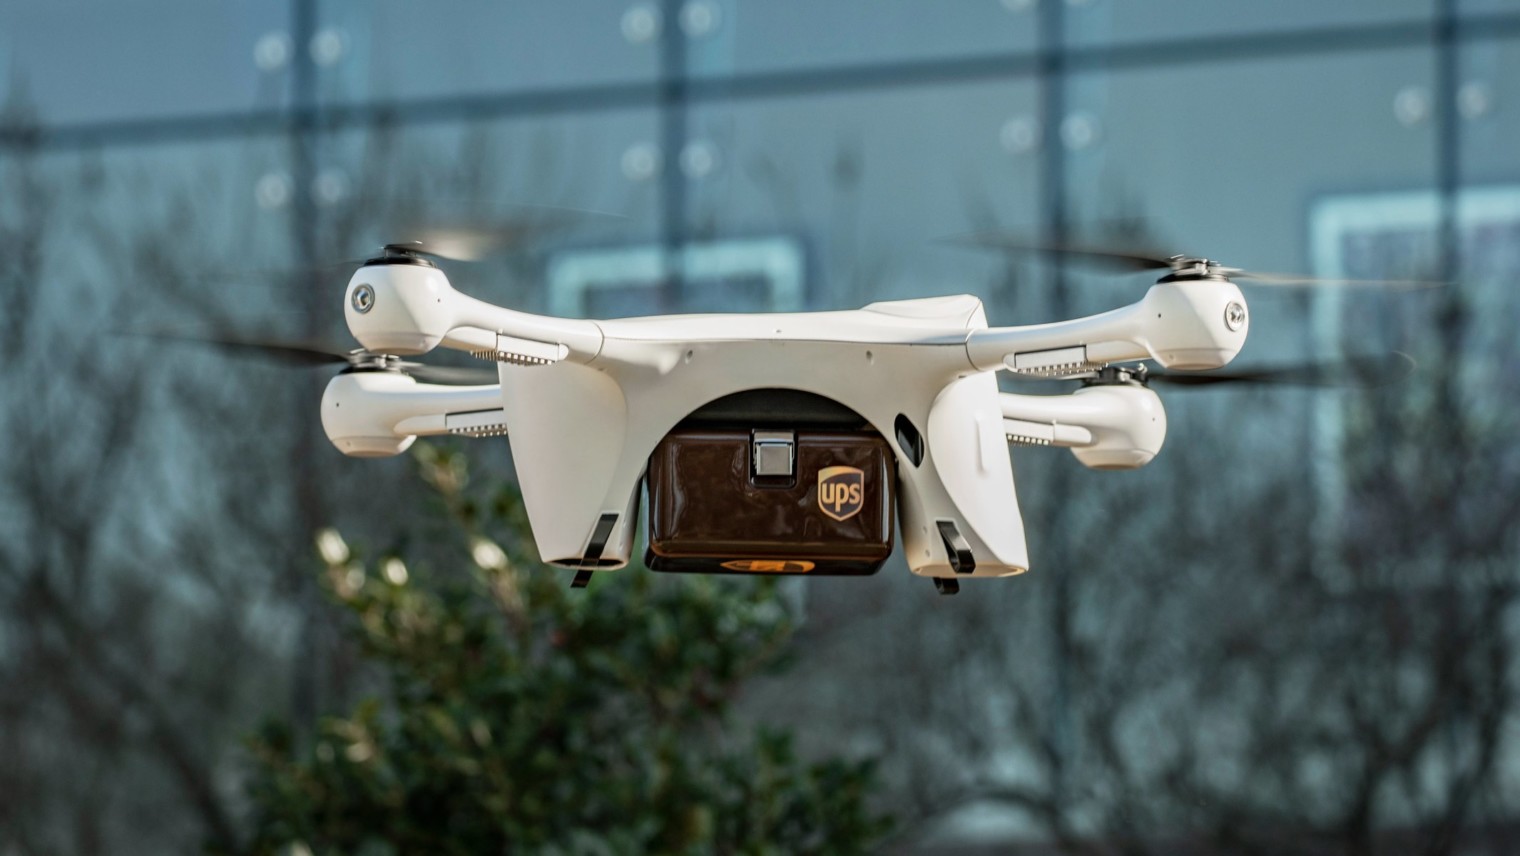 In the USA, they want to assign license plates to all drones